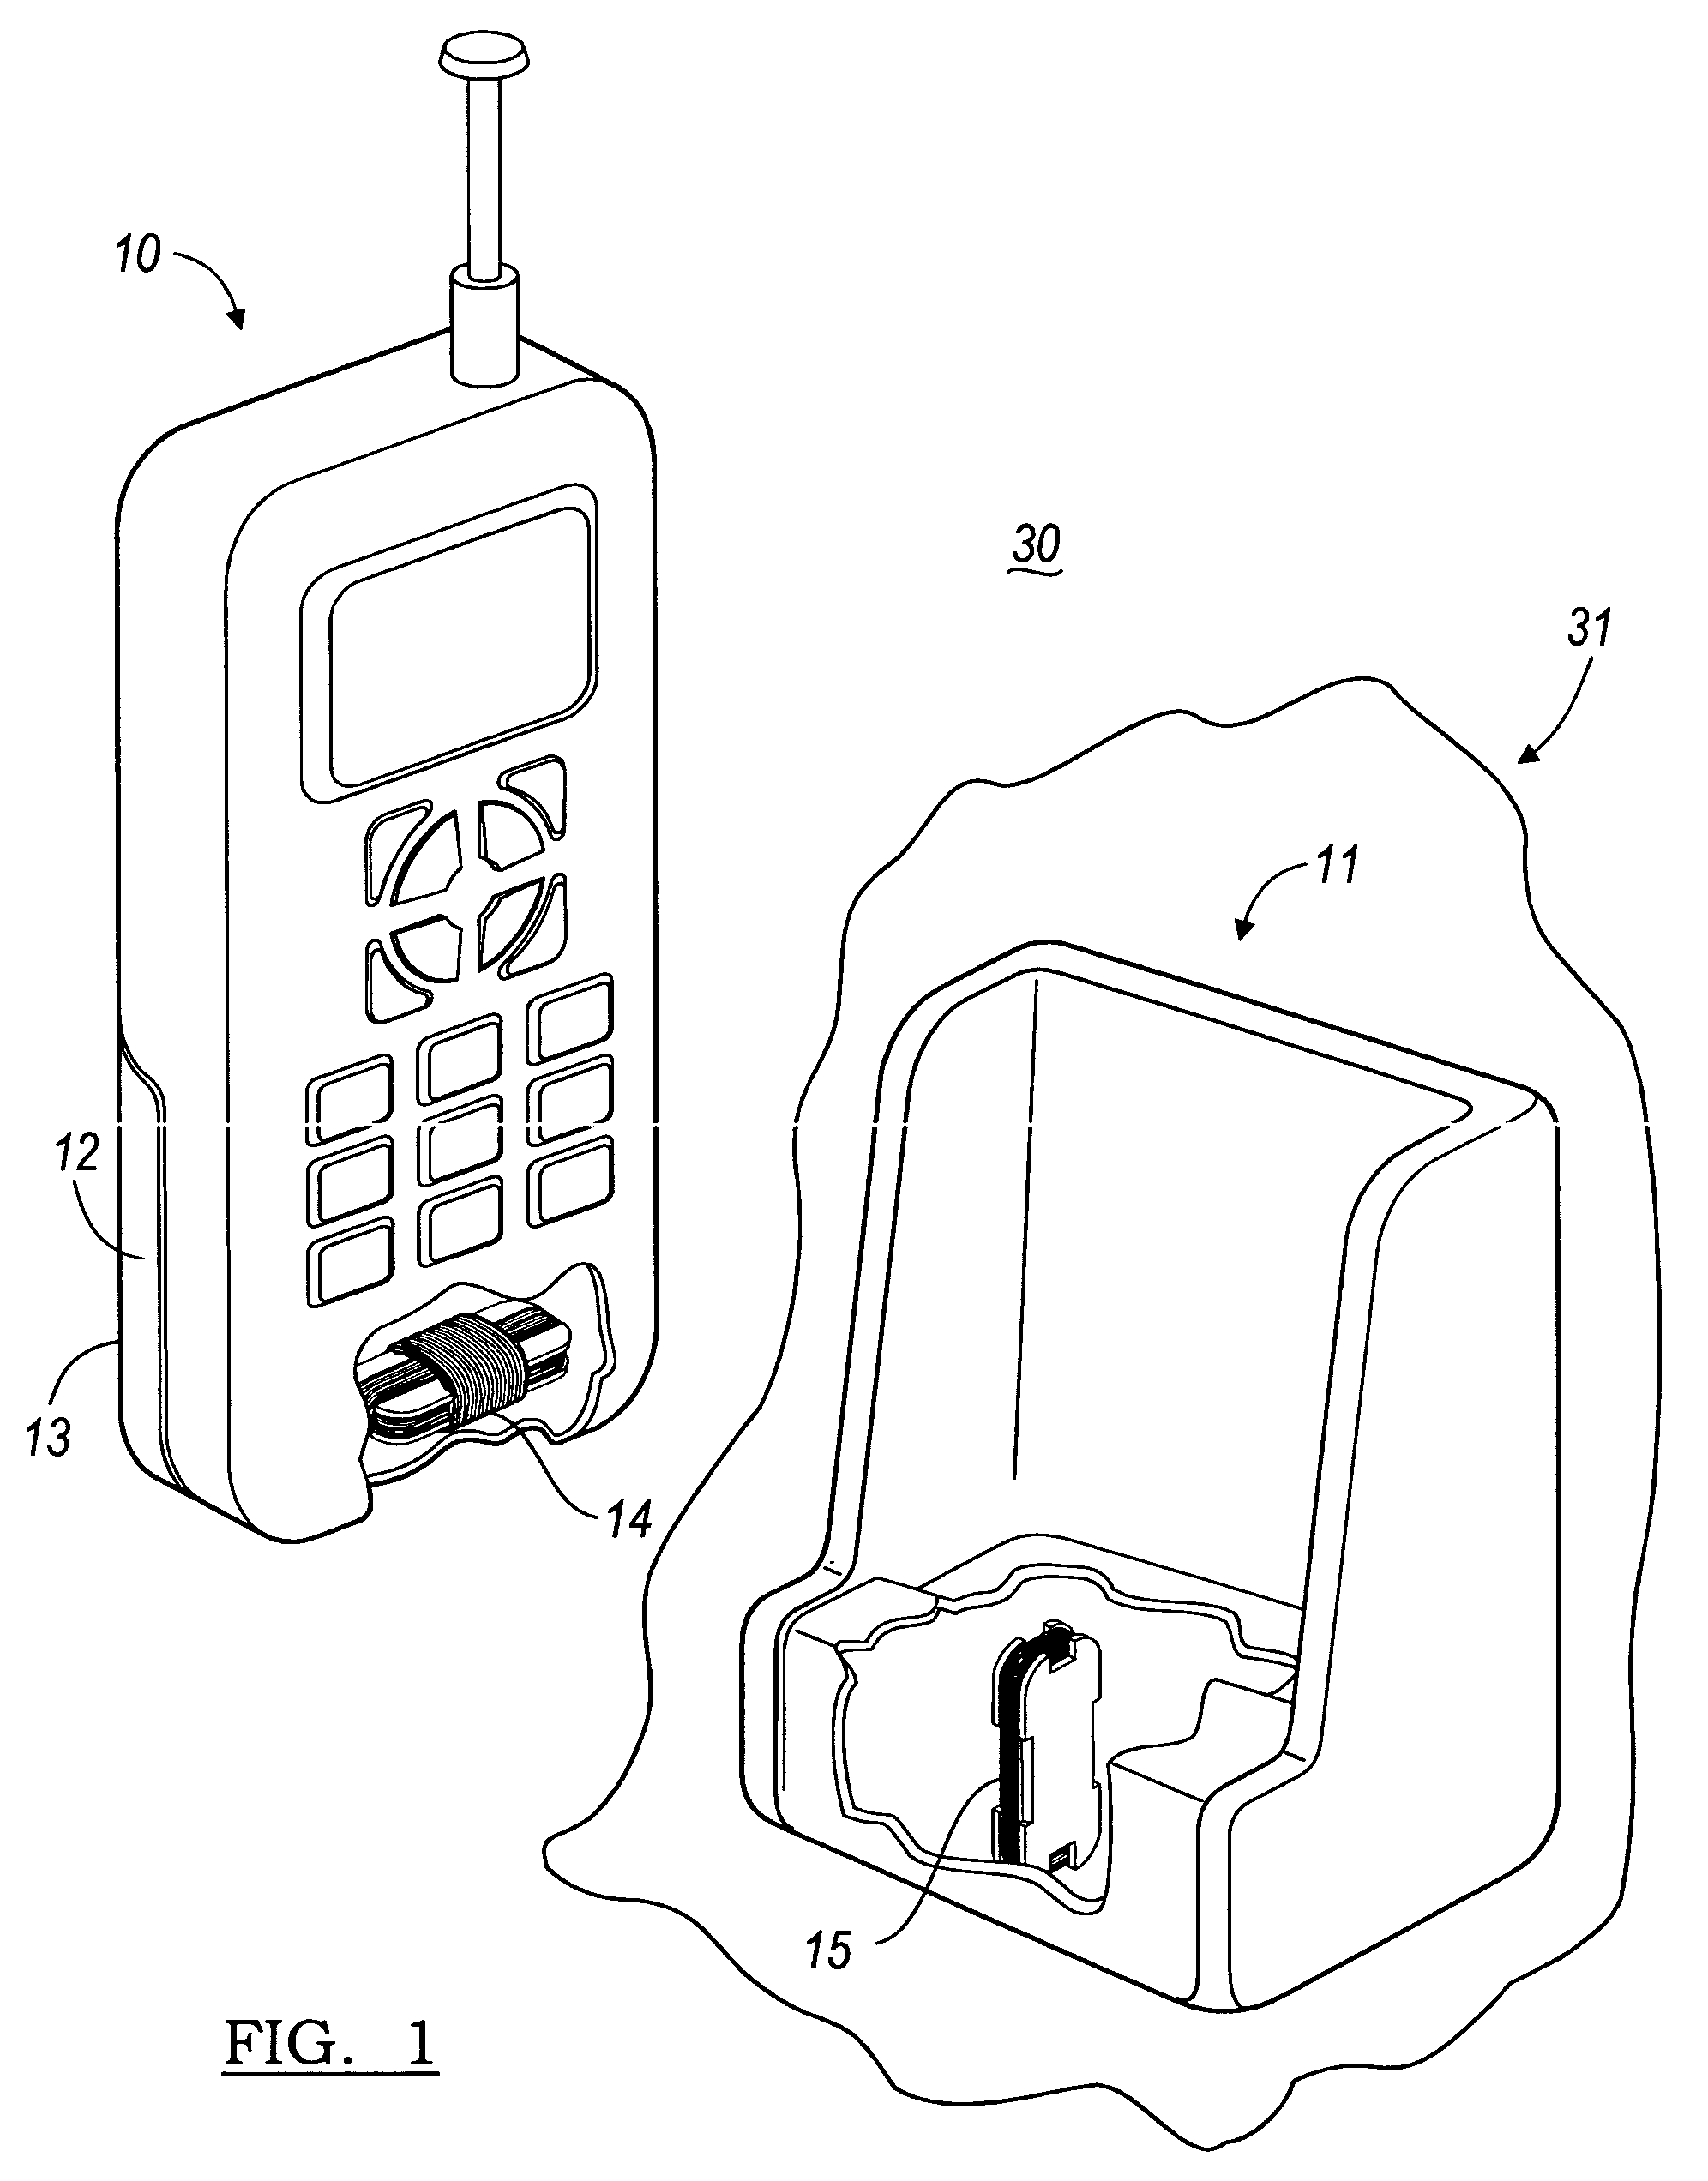 Apparatus for inductively recharging batteries of a portable convenience device